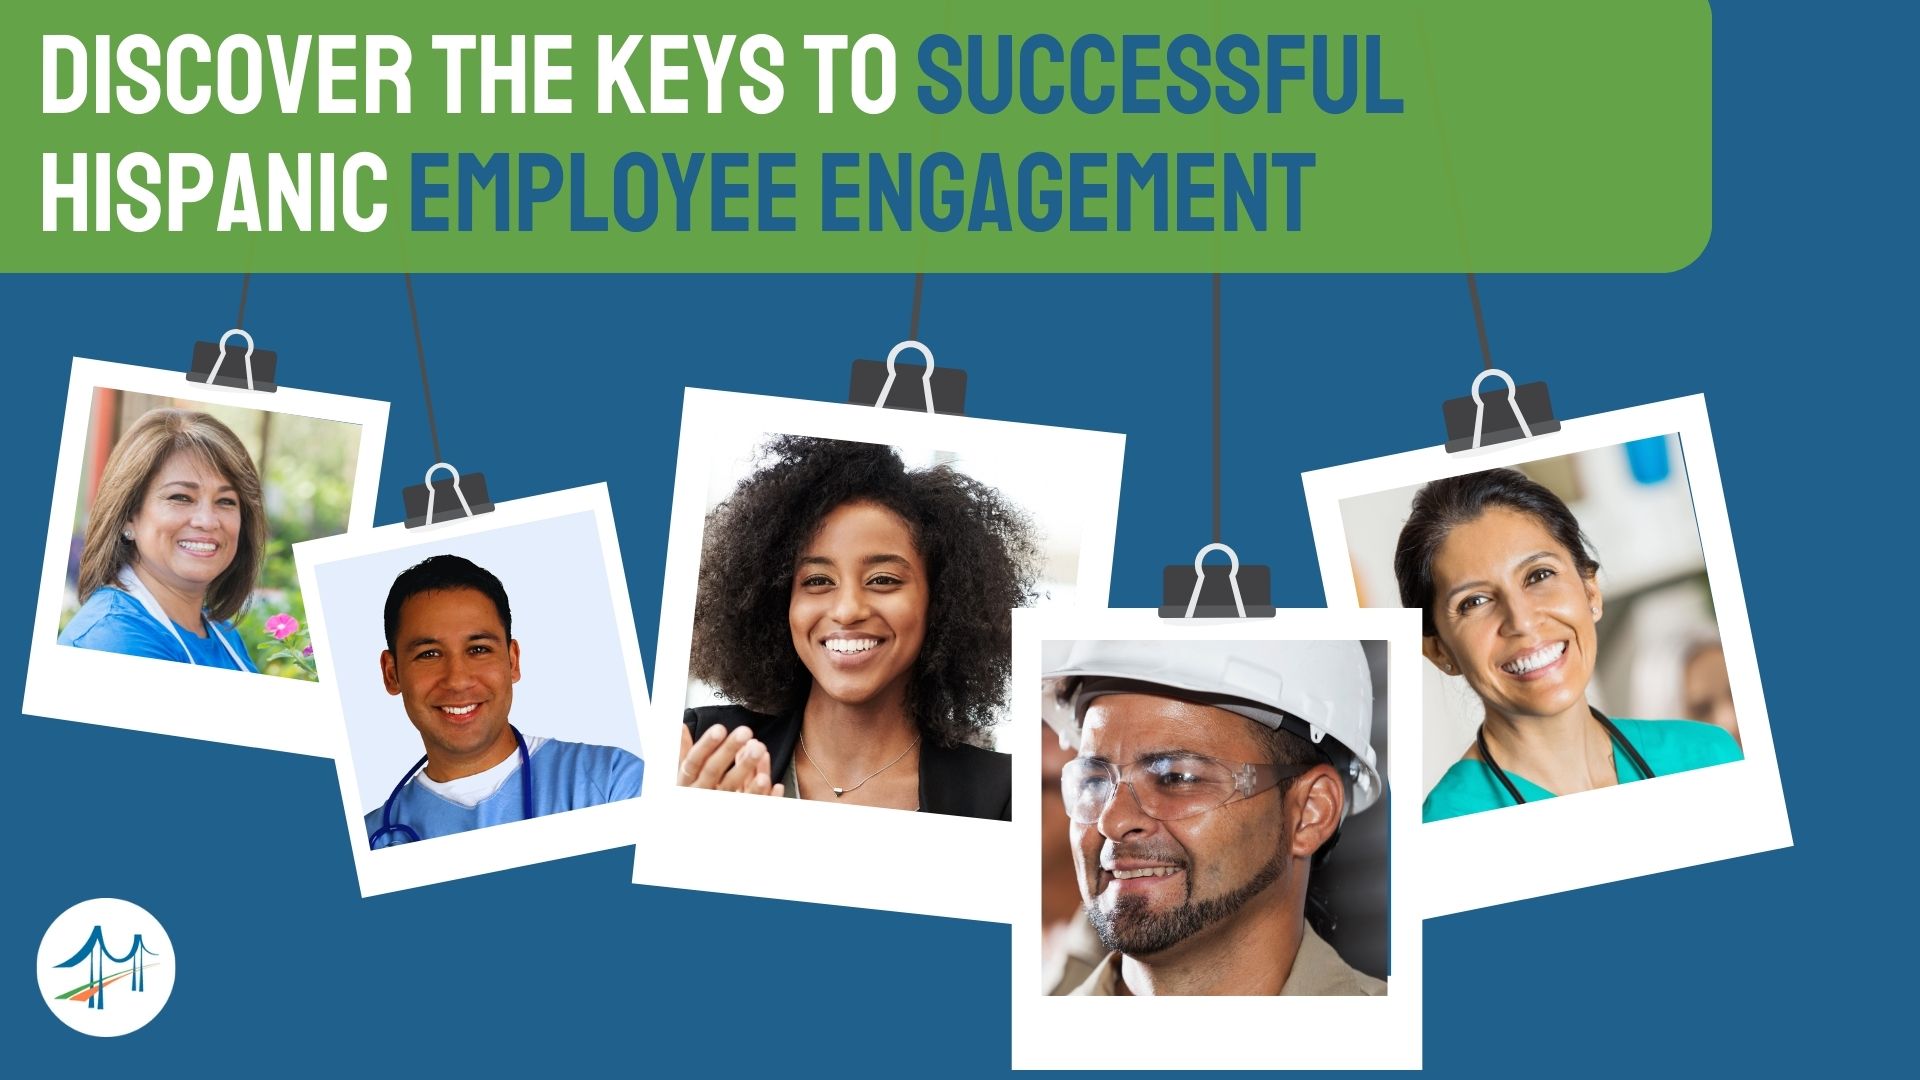 Learn to better understand, manage and engage with Hispanic employees and create a healthier workplace environment, hispanic culture in the workplace